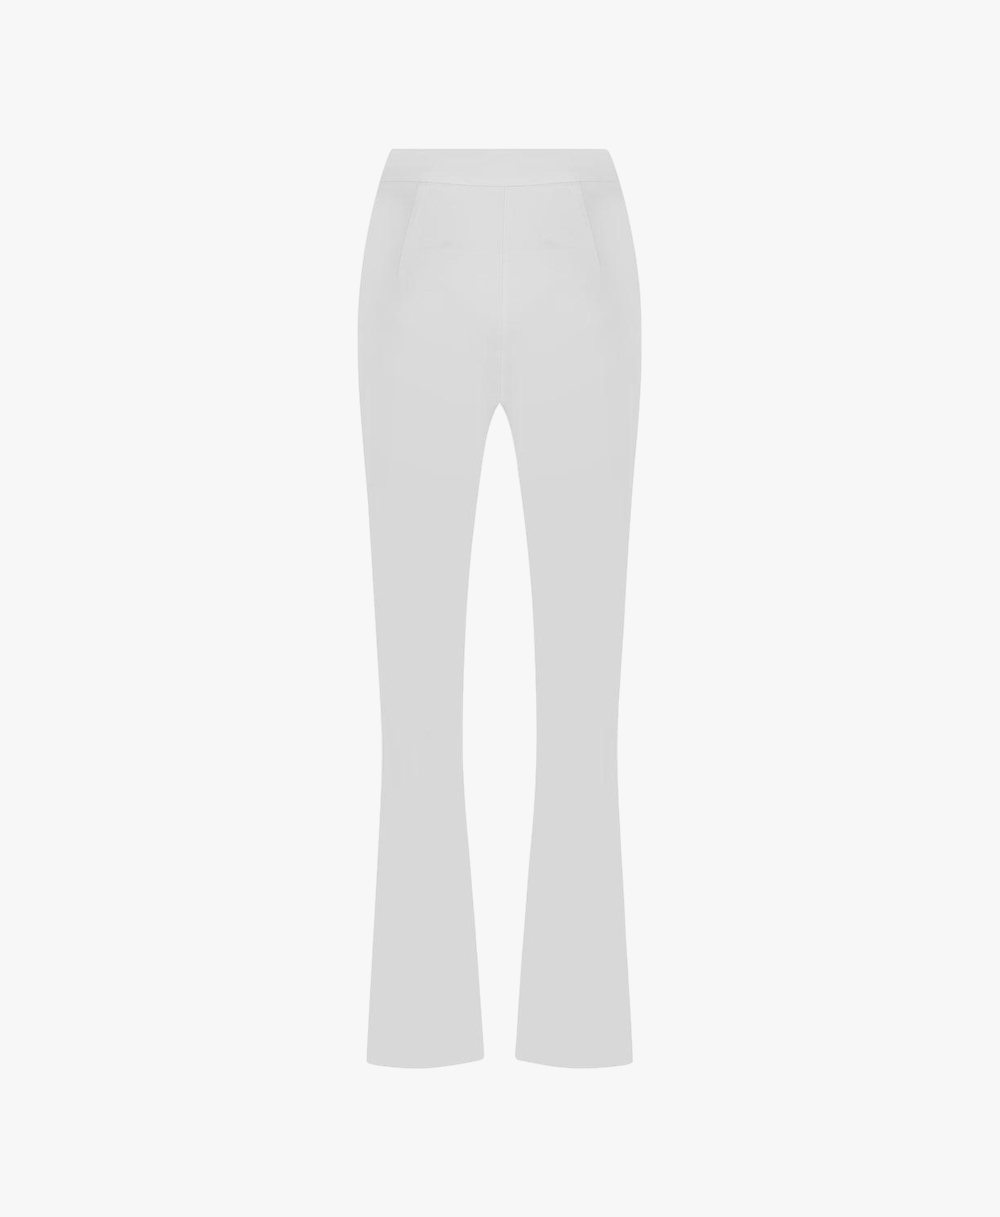 CANIS-TROUSERS WITH FRONT SLIT IN WHITE image #1